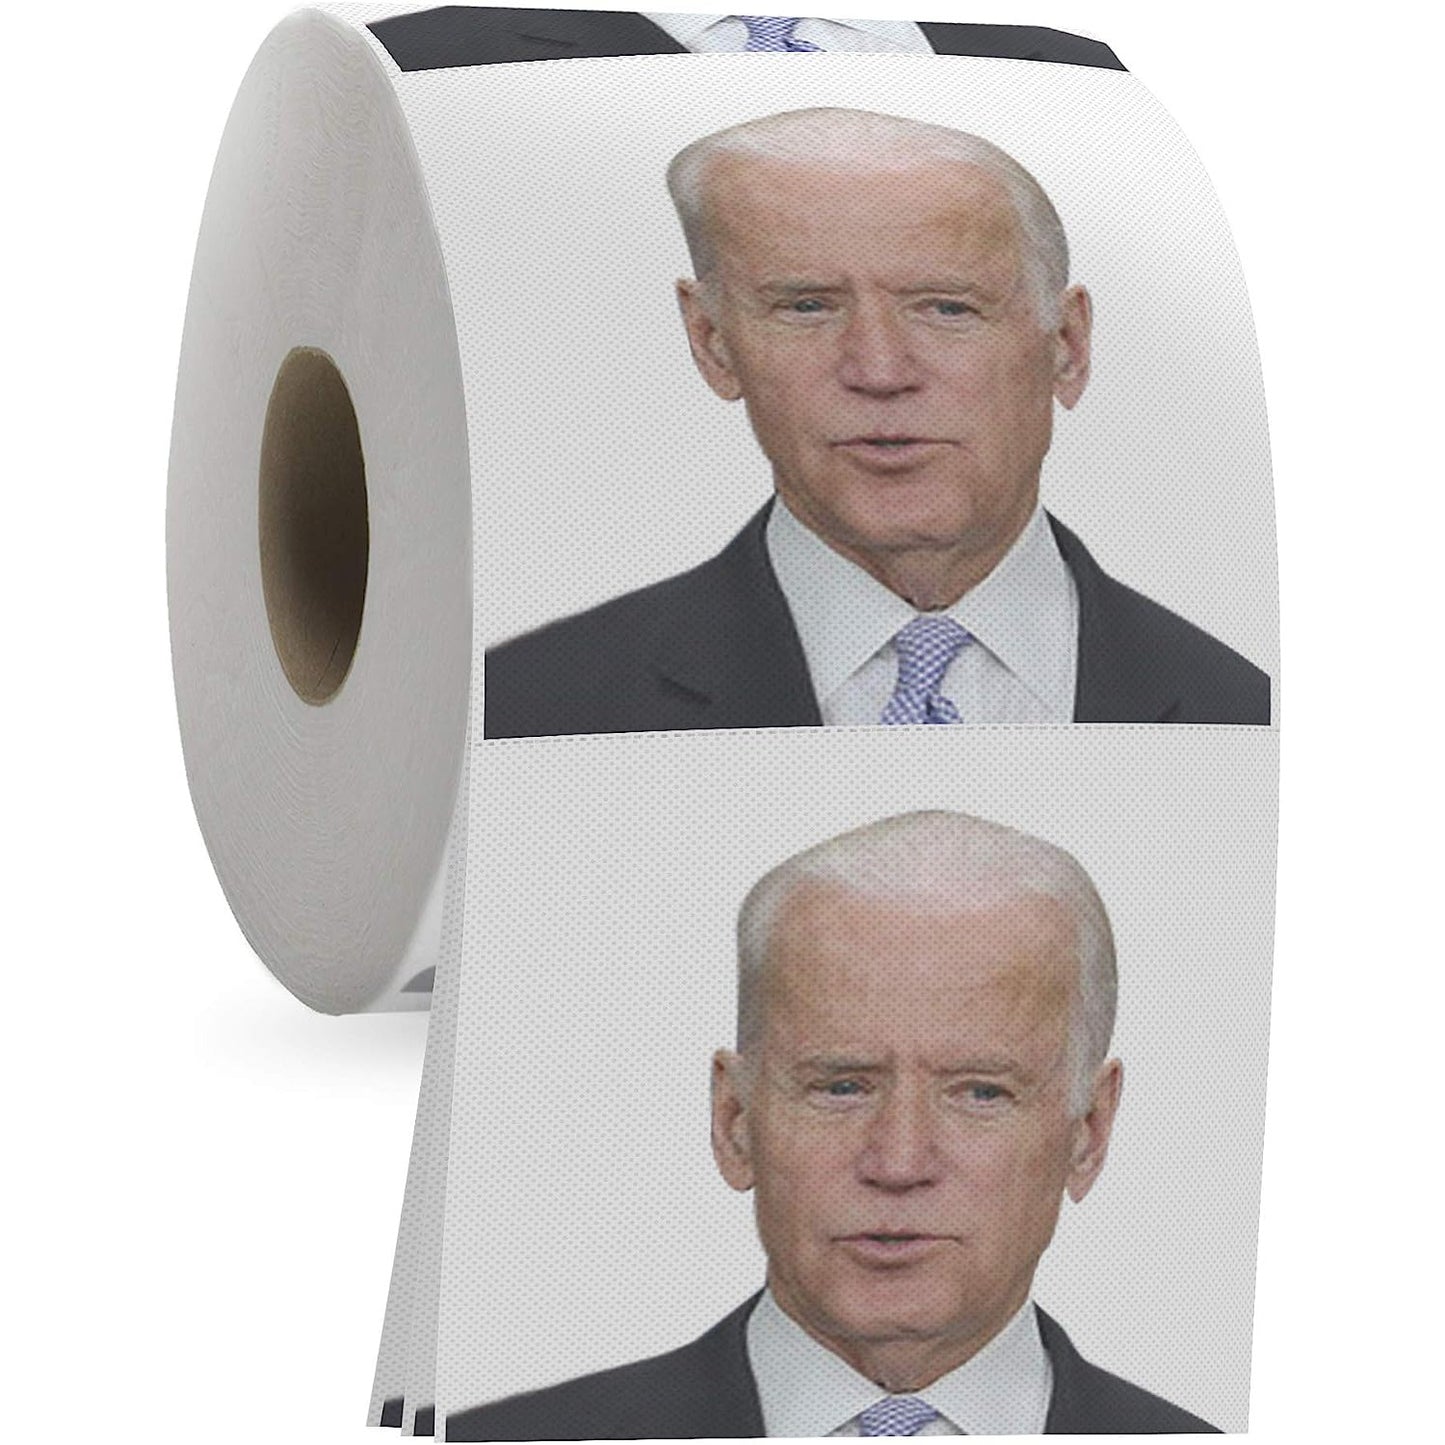 A roll of toilet paper with Joe Biden's face printed on it.